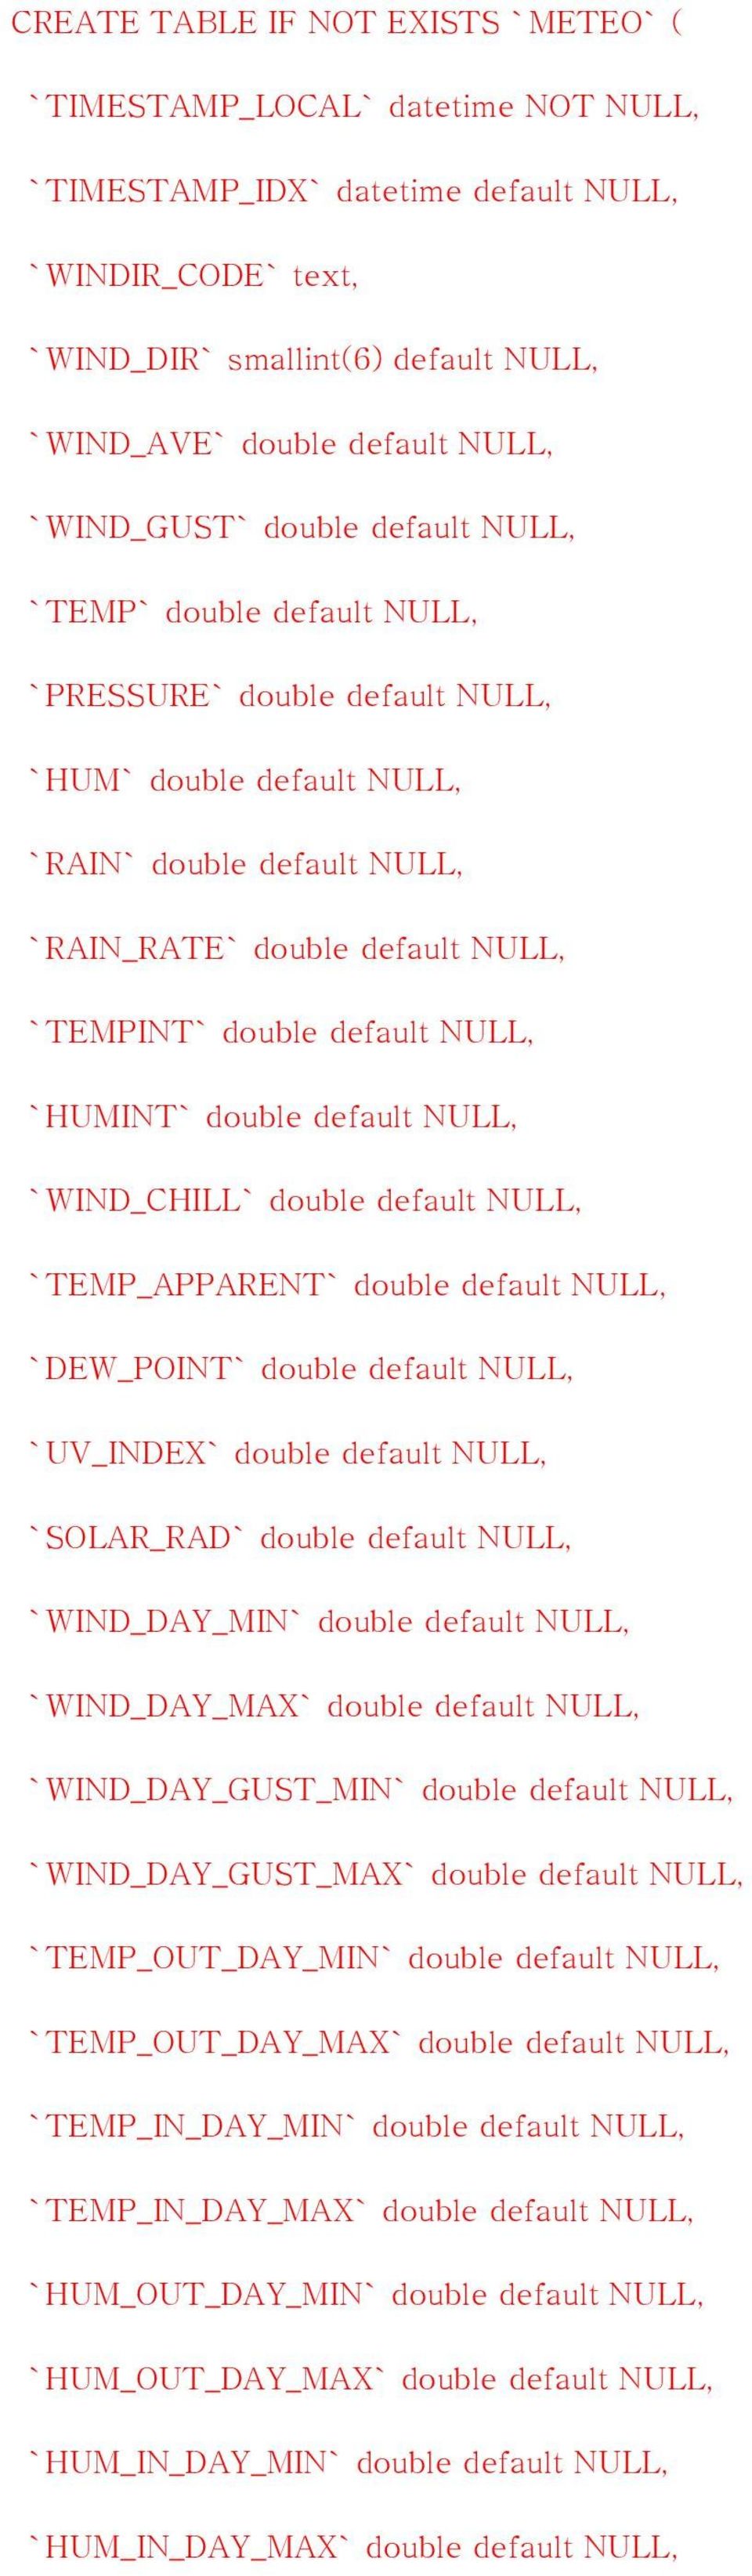 double default NULL, `HUMINT` double default NULL, `WIND_CHILL` double default NULL, `TEMP_APPARENT` double default NULL, `DEW_POINT` double default NULL, `UV_INDEX` double default NULL, `SOLAR_RAD`